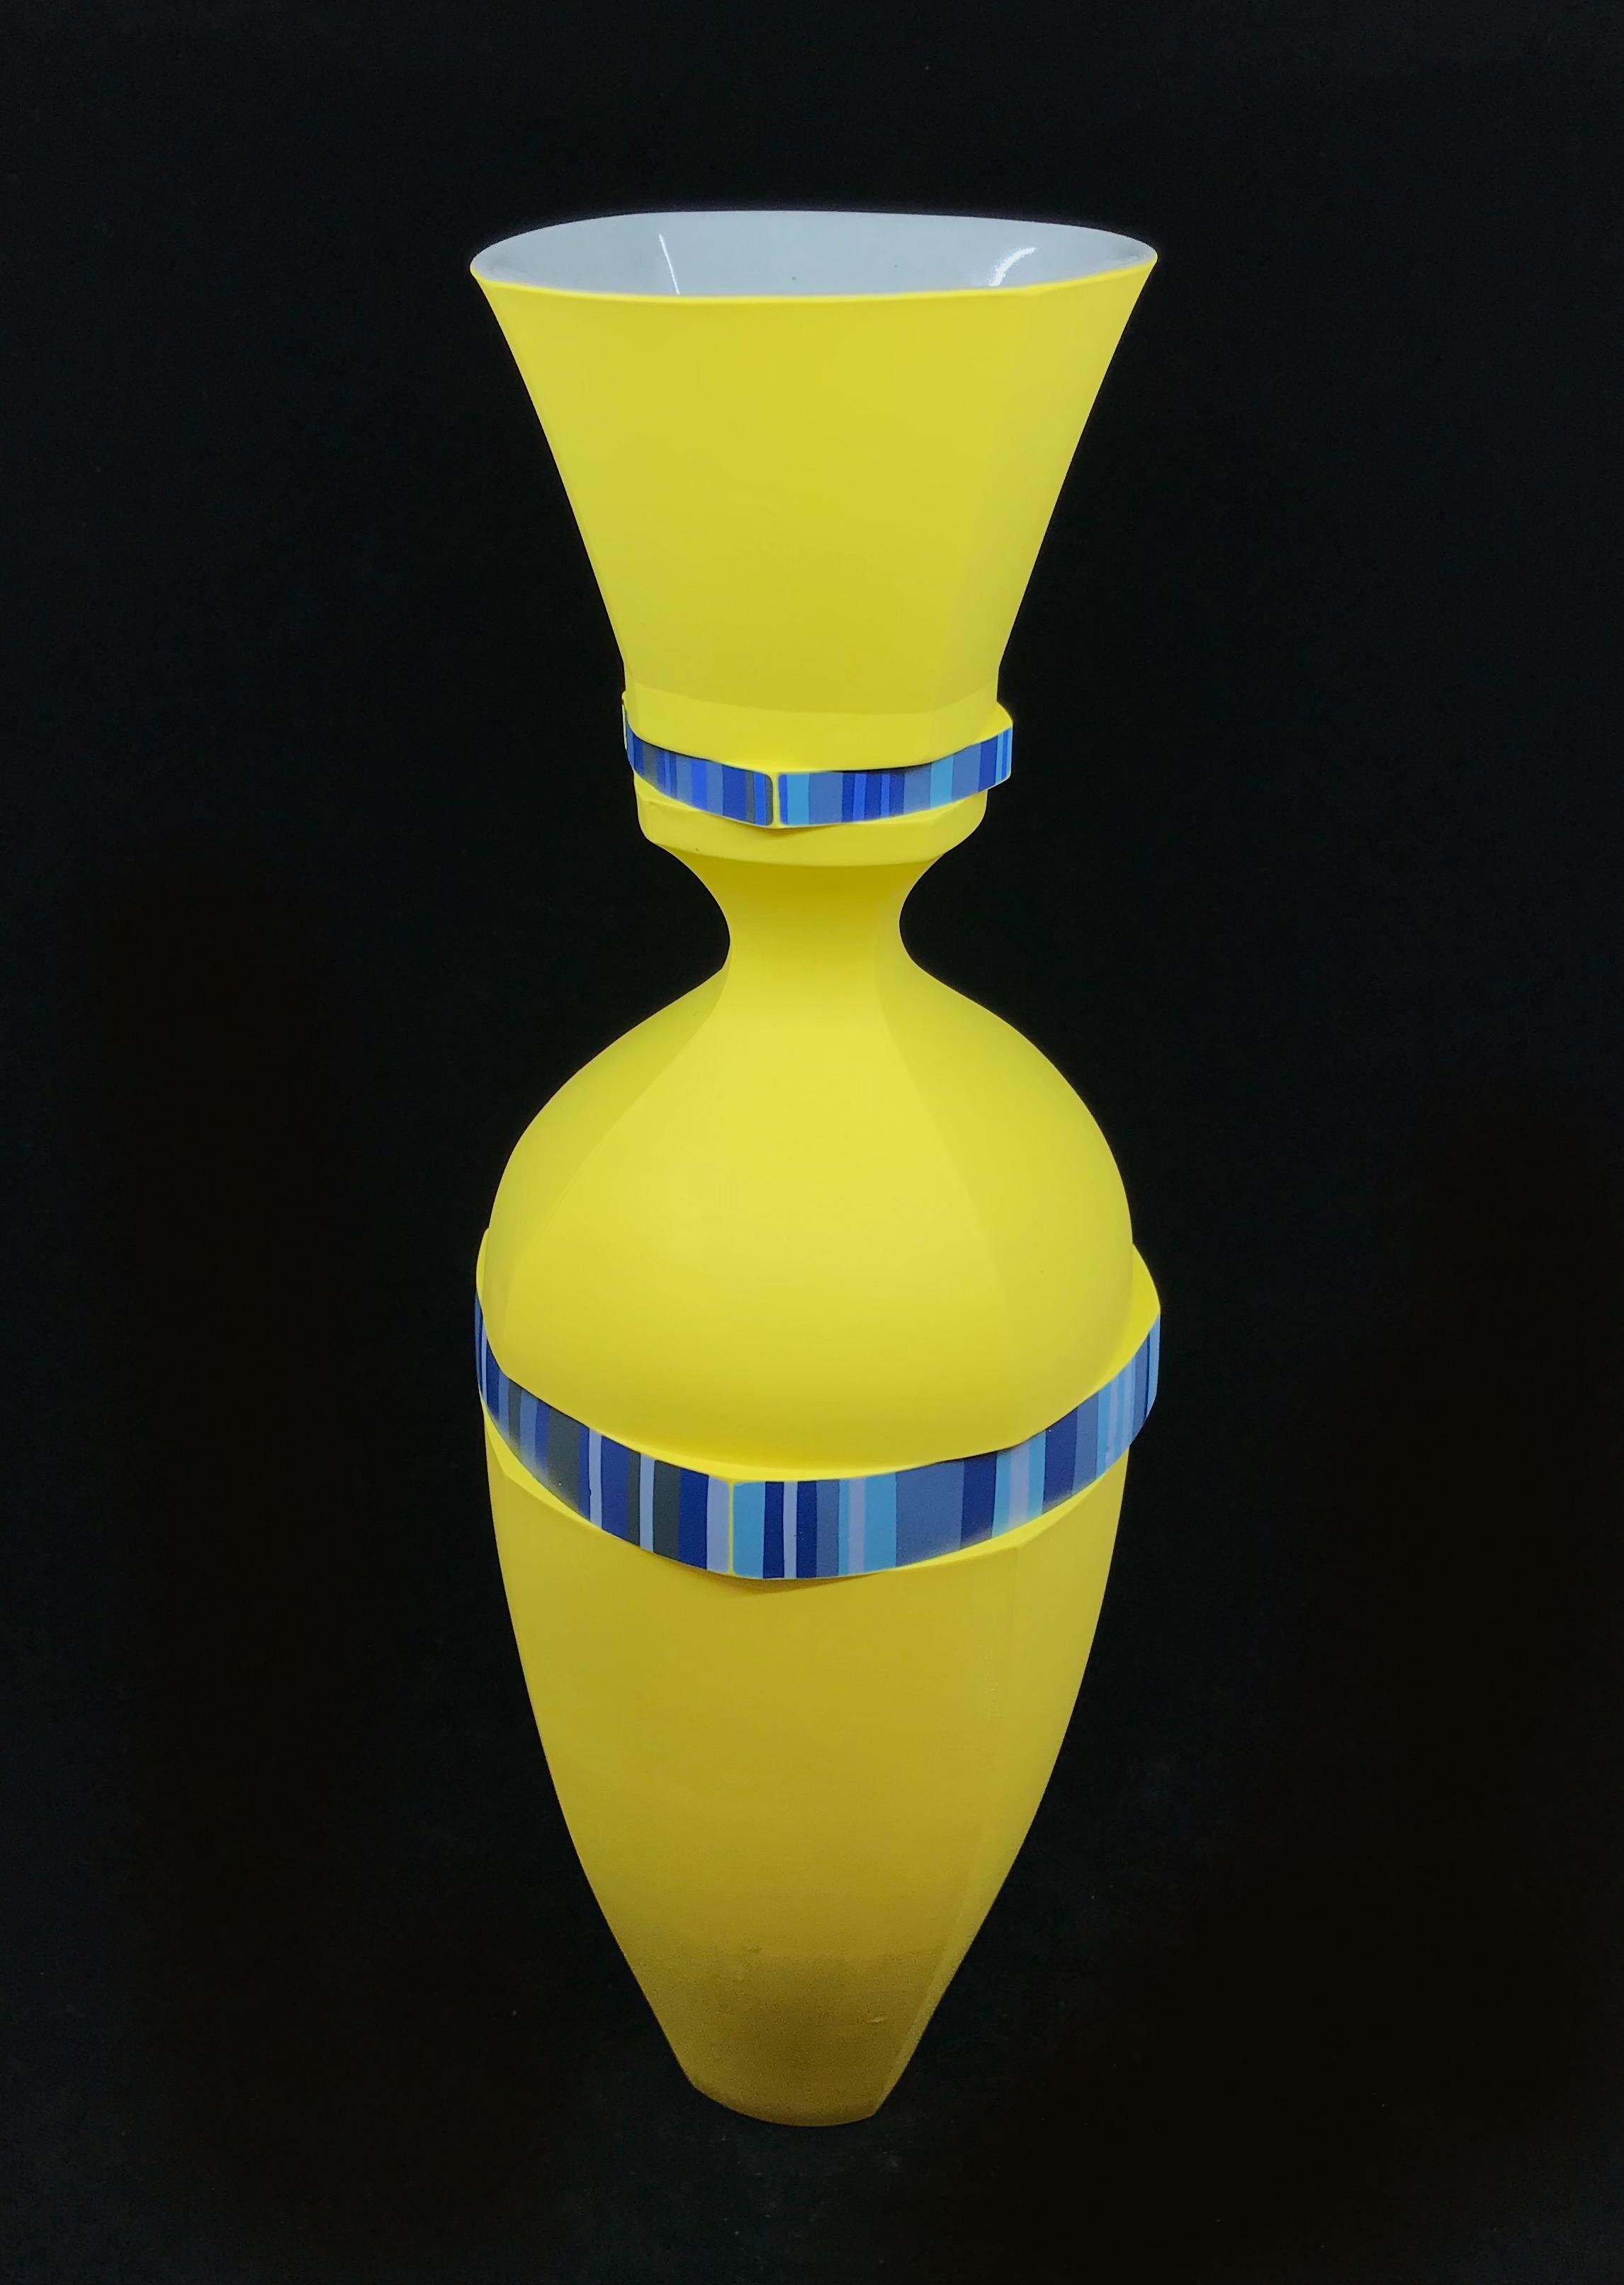 Yellow Vase, Contemporary Design, Porcelain Sculpture with Geometric Pattern - White Abstract Sculpture by Peter Pincus